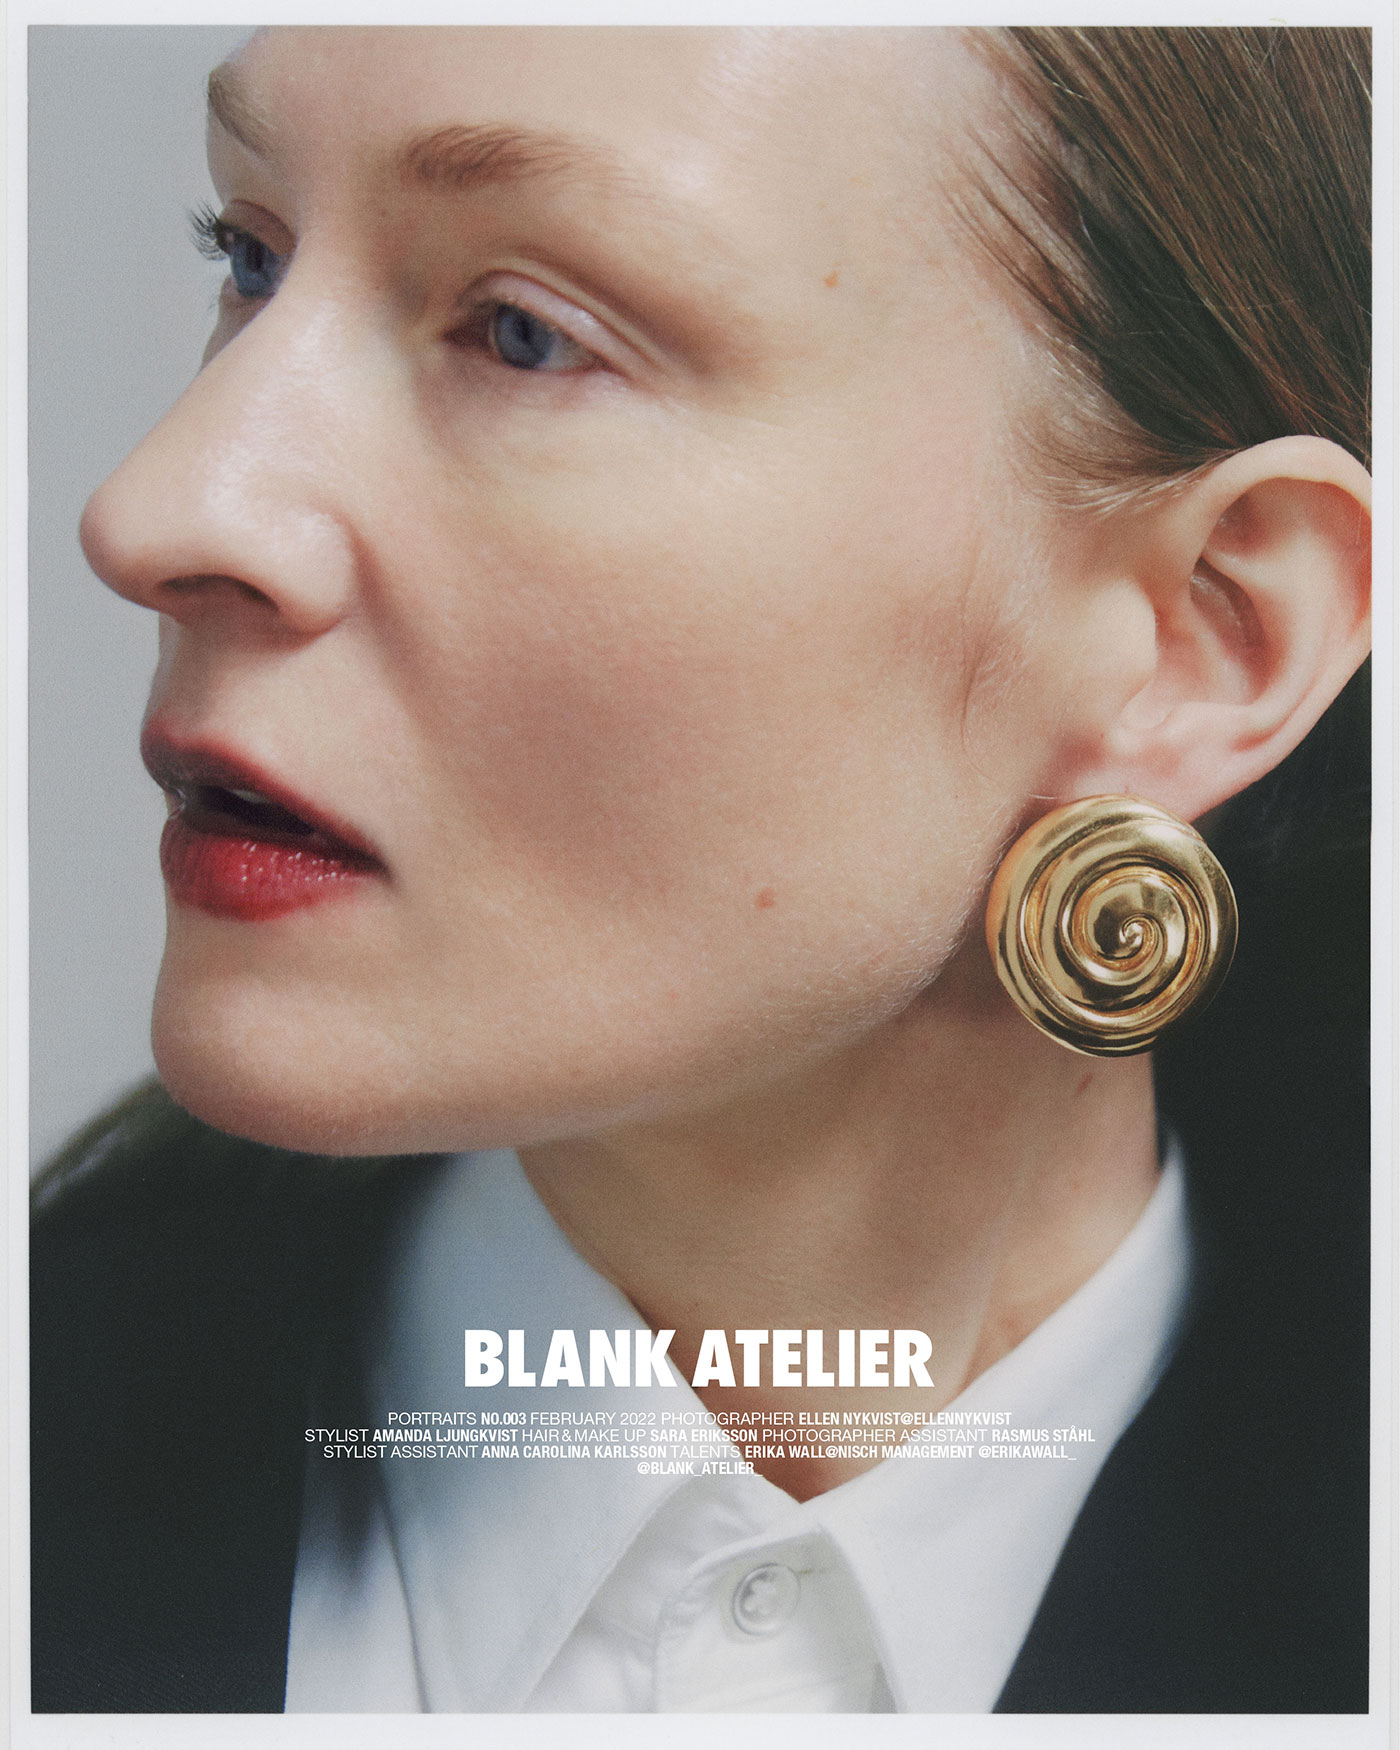 Blank Atelier – Campaign AD 2022